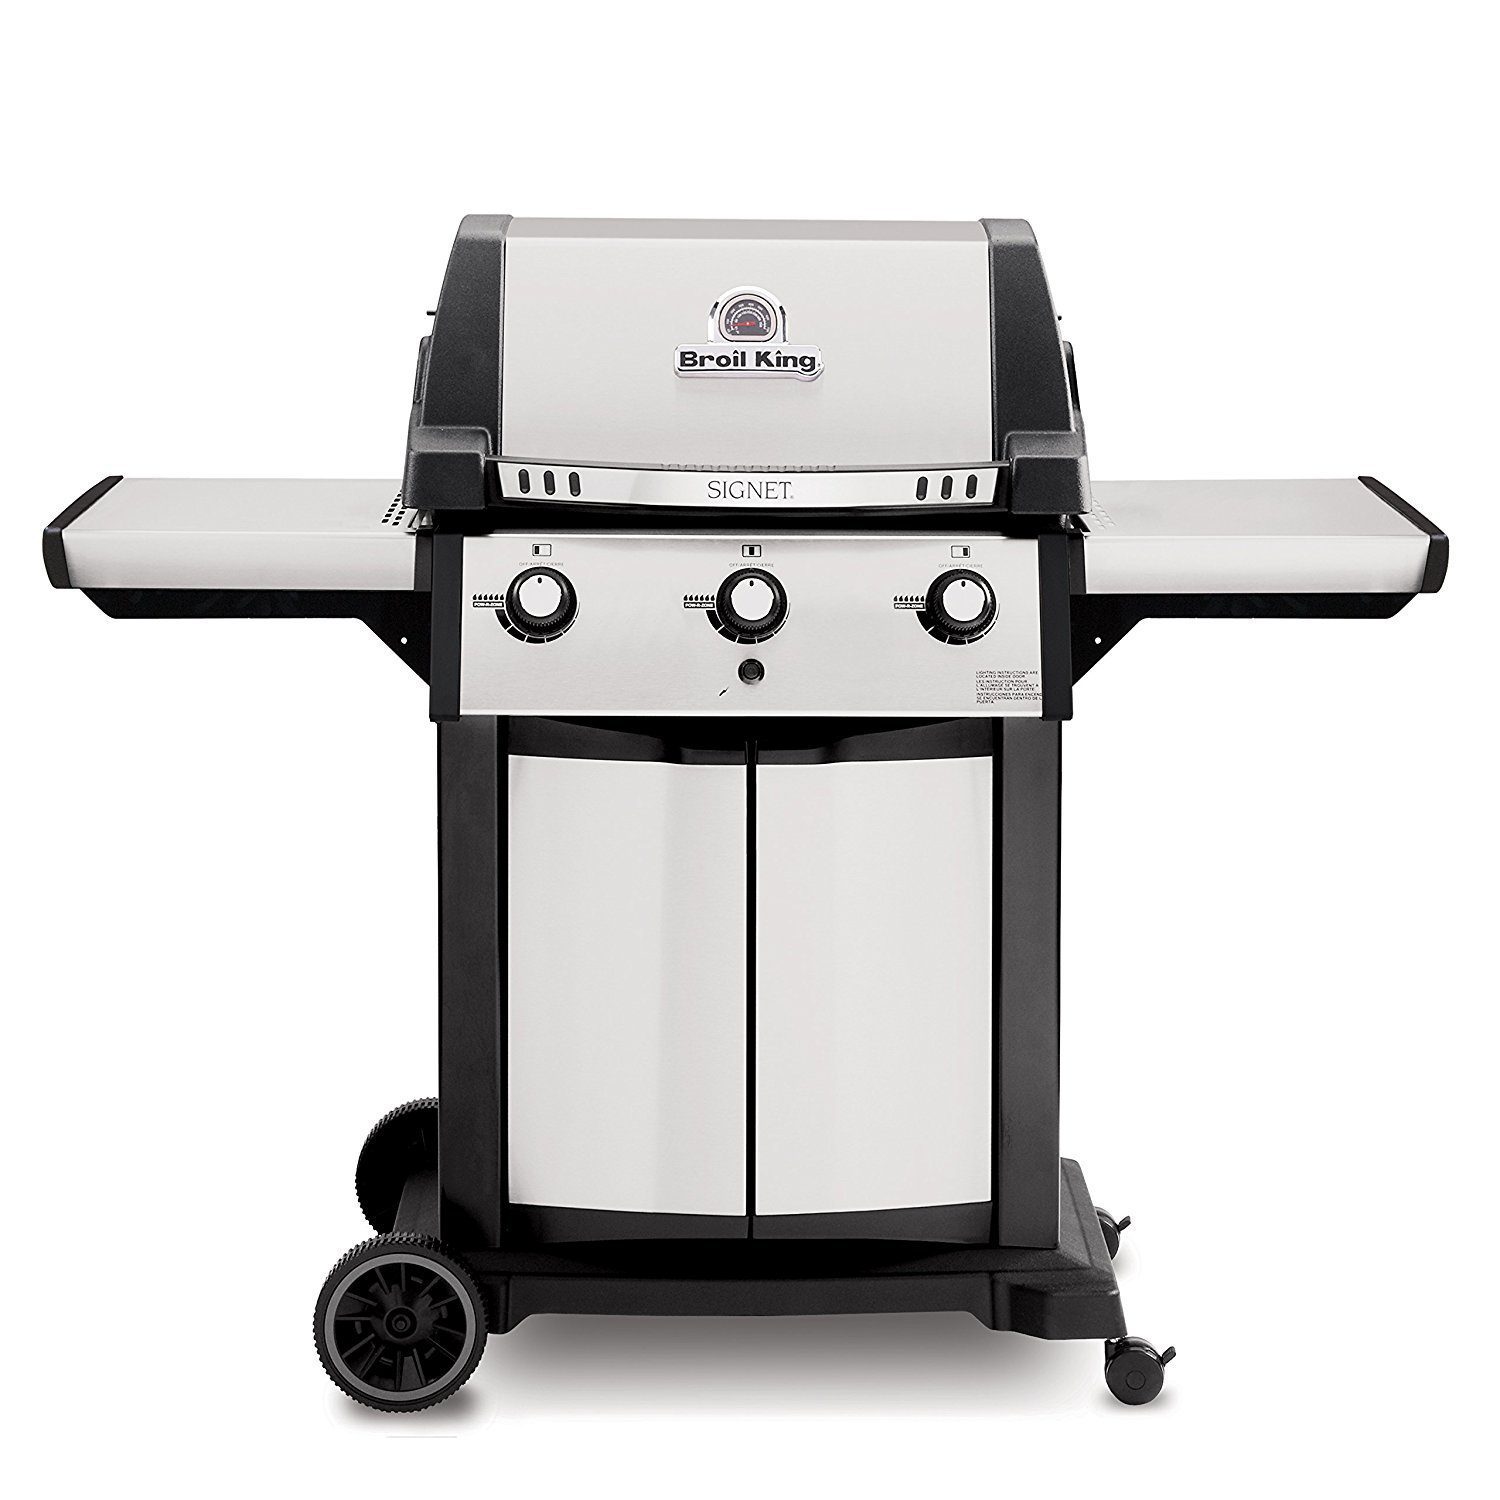 Top Gas Grills Between $250 and $500 for 2017